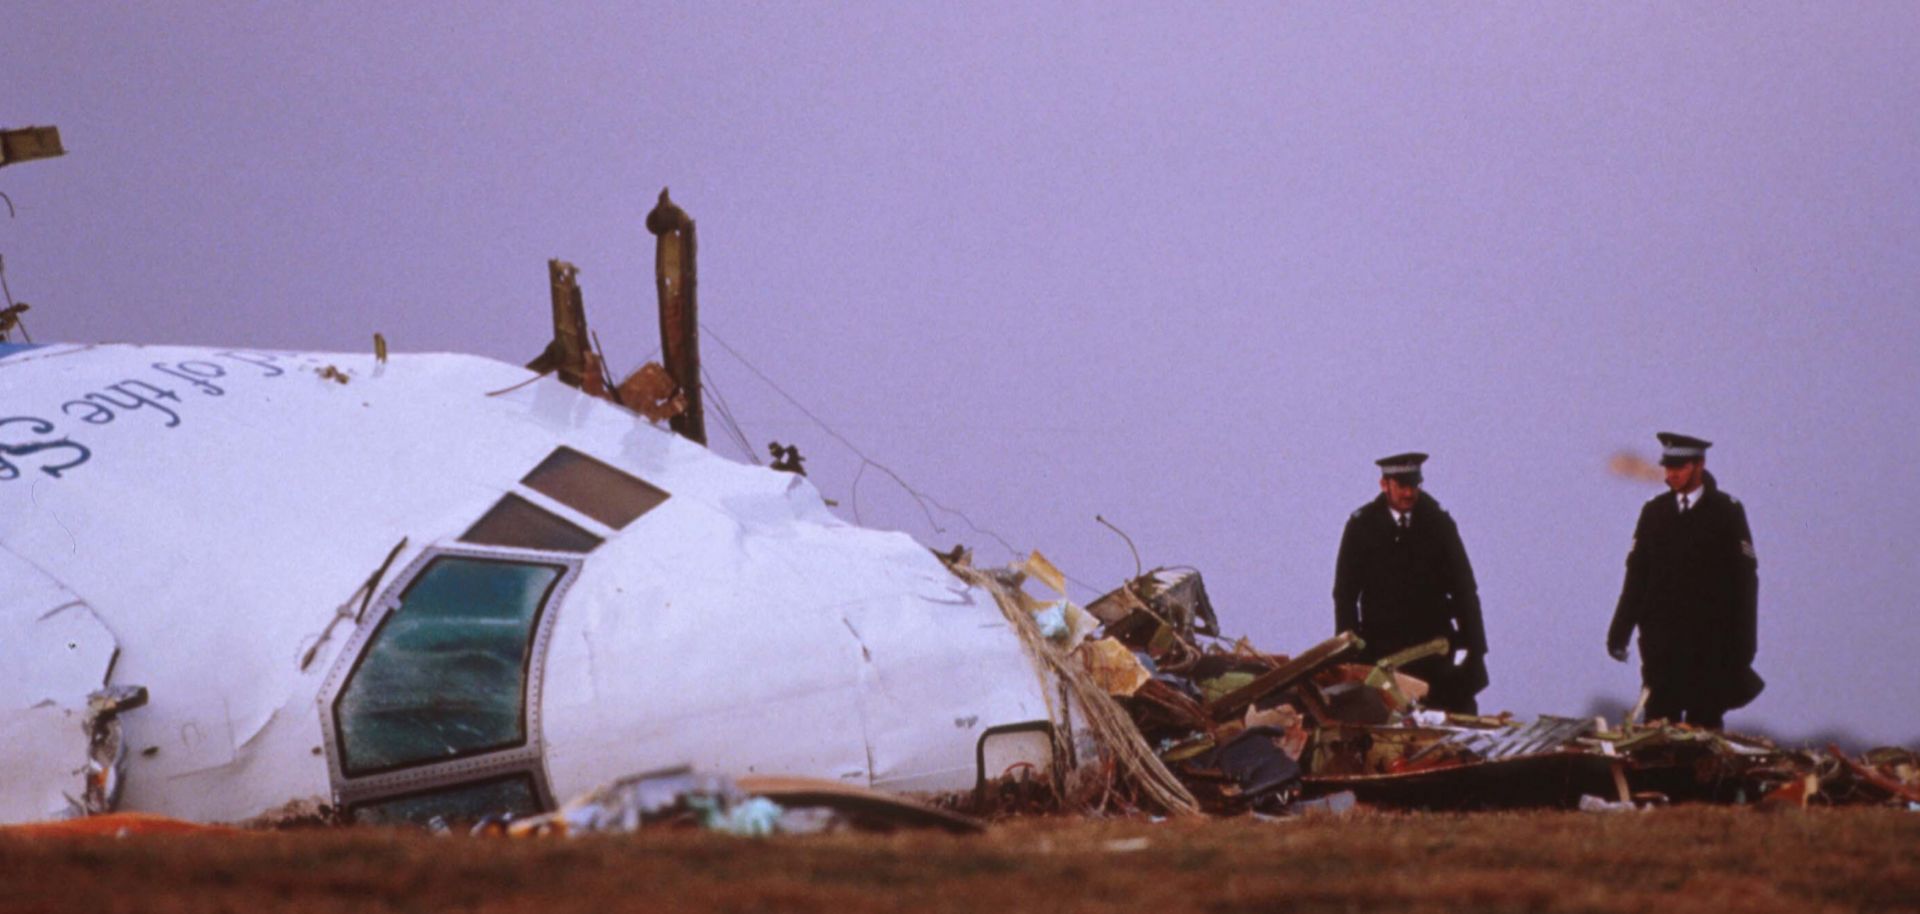 The bombing of Pan Am Flight 103 over Lockerbie, Scotland, set off a massive investigation, eventually tracing the culpability for the attack to Libyan-directed terrorists.